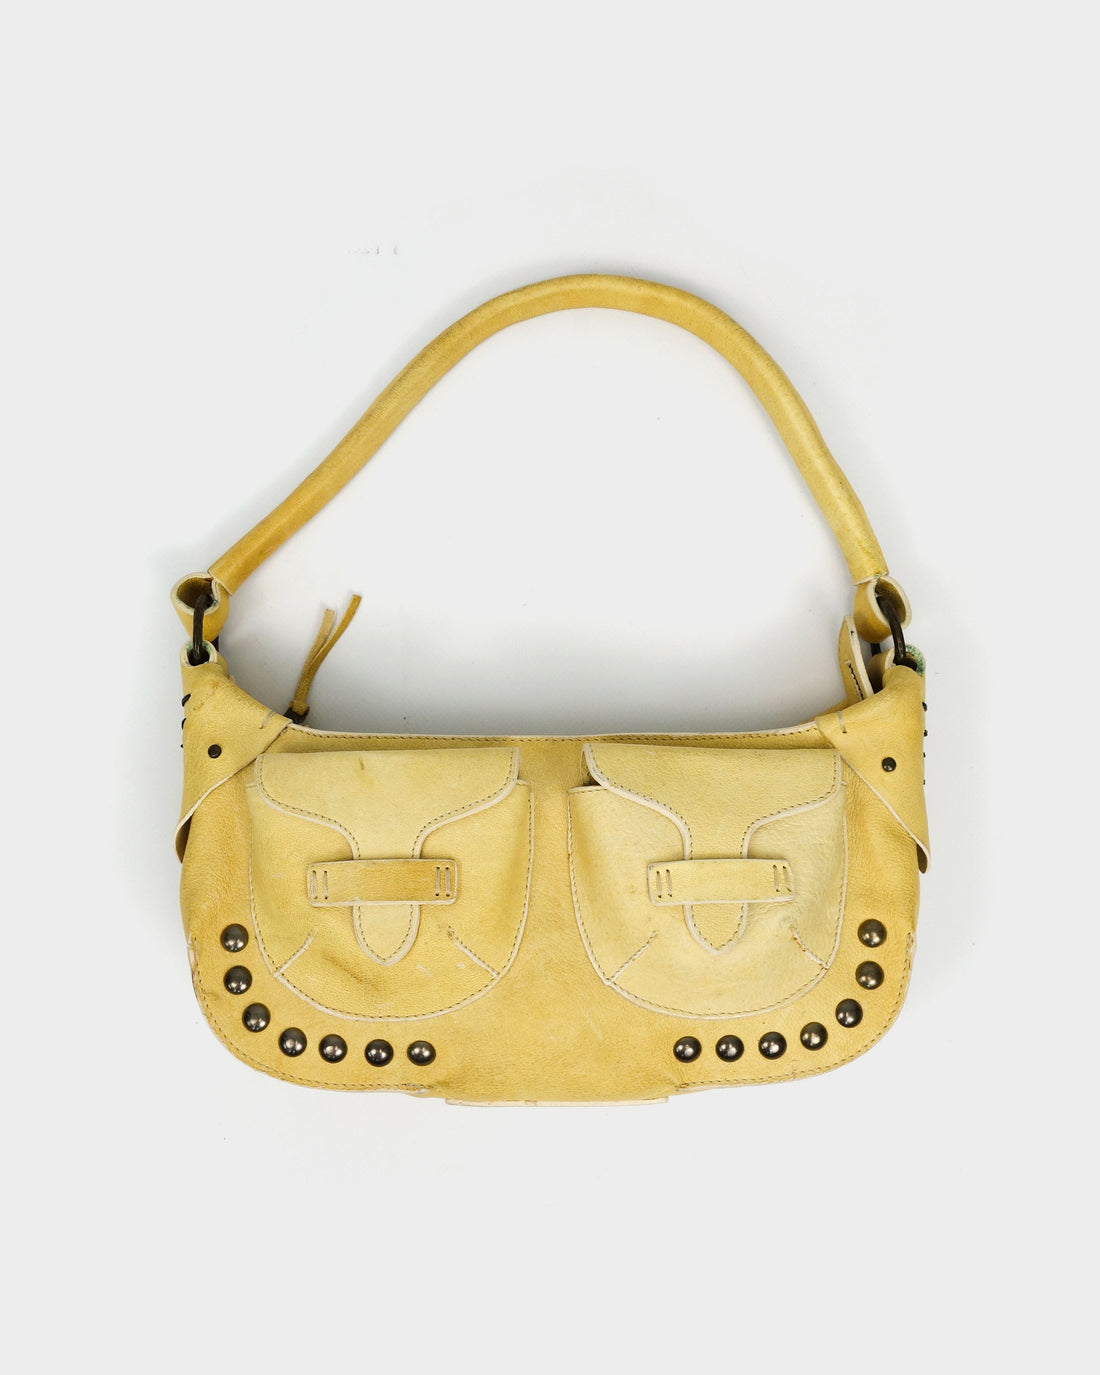 Cavalli Freedom Faded Yellow Leather Bag 2000's